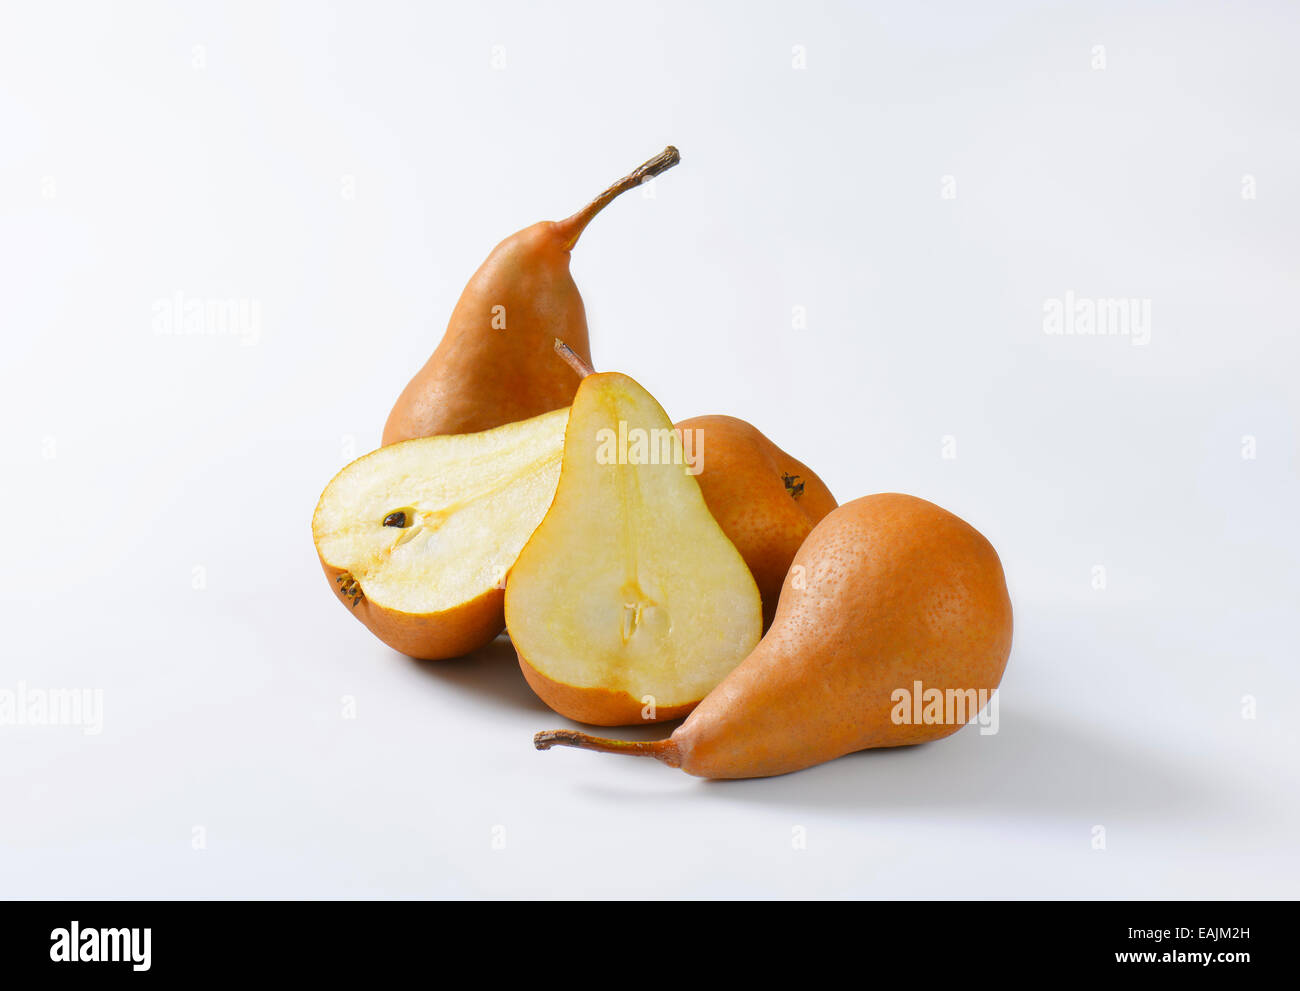 European pears, whole and cut in halves Stock Photo